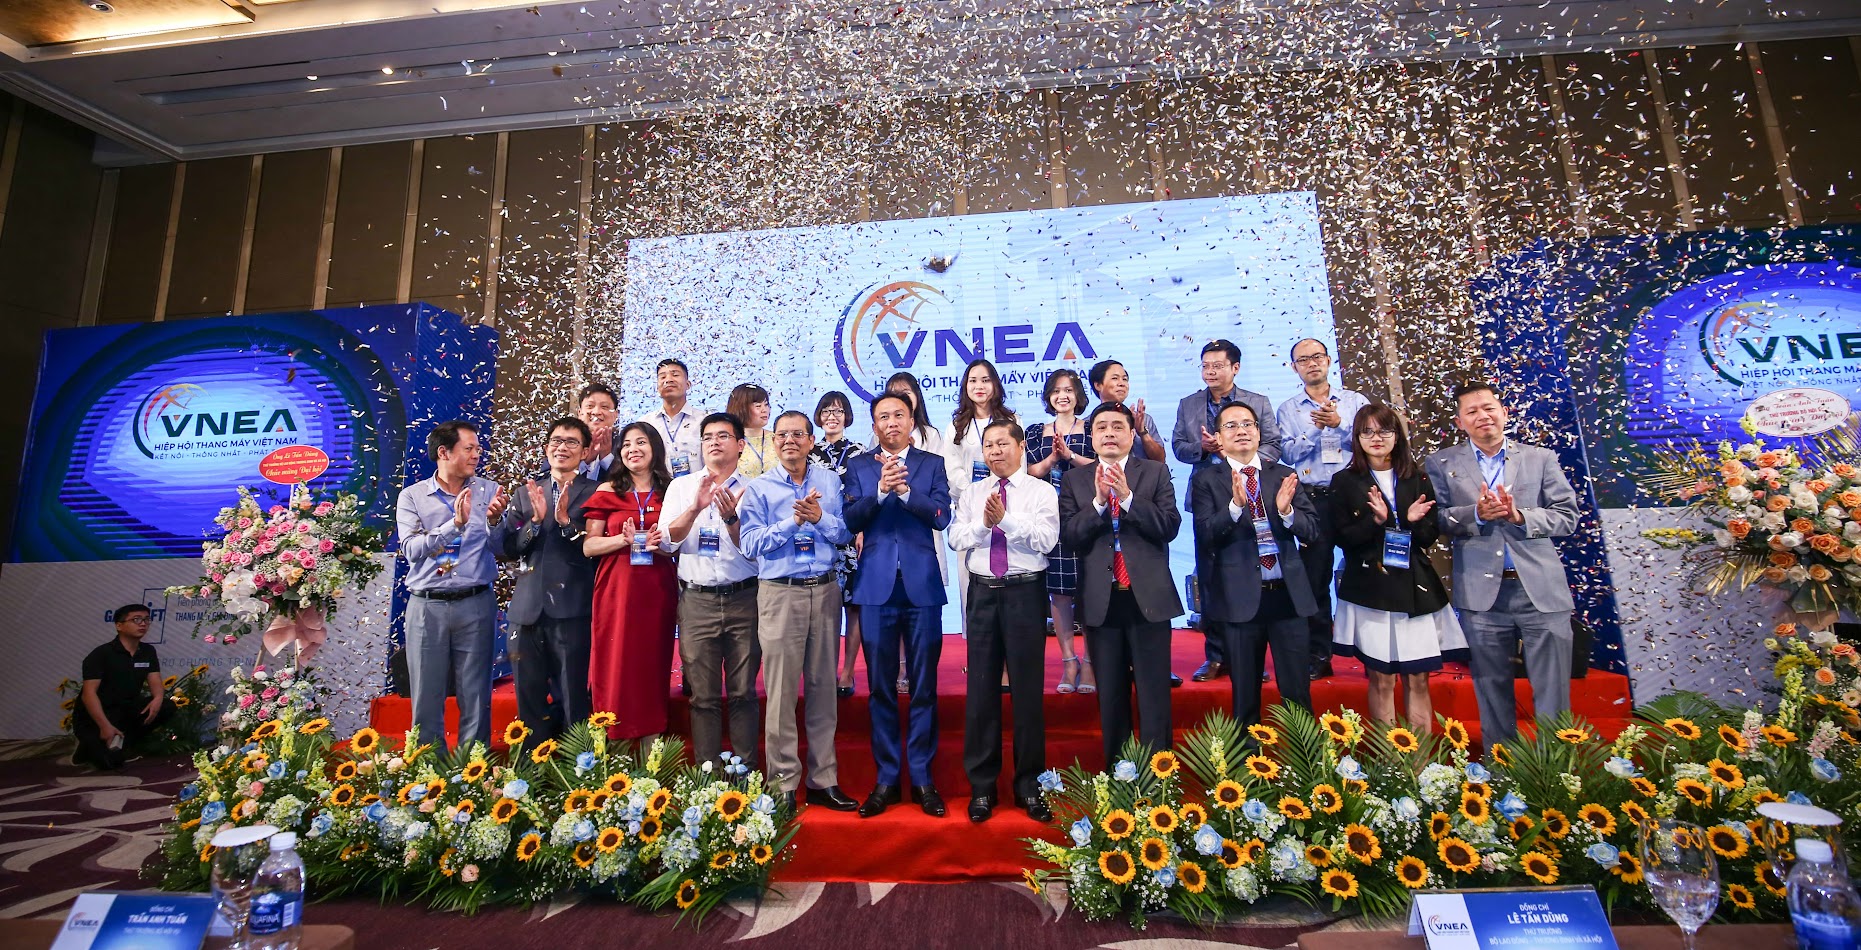 VNEA launched on September 8, 2020